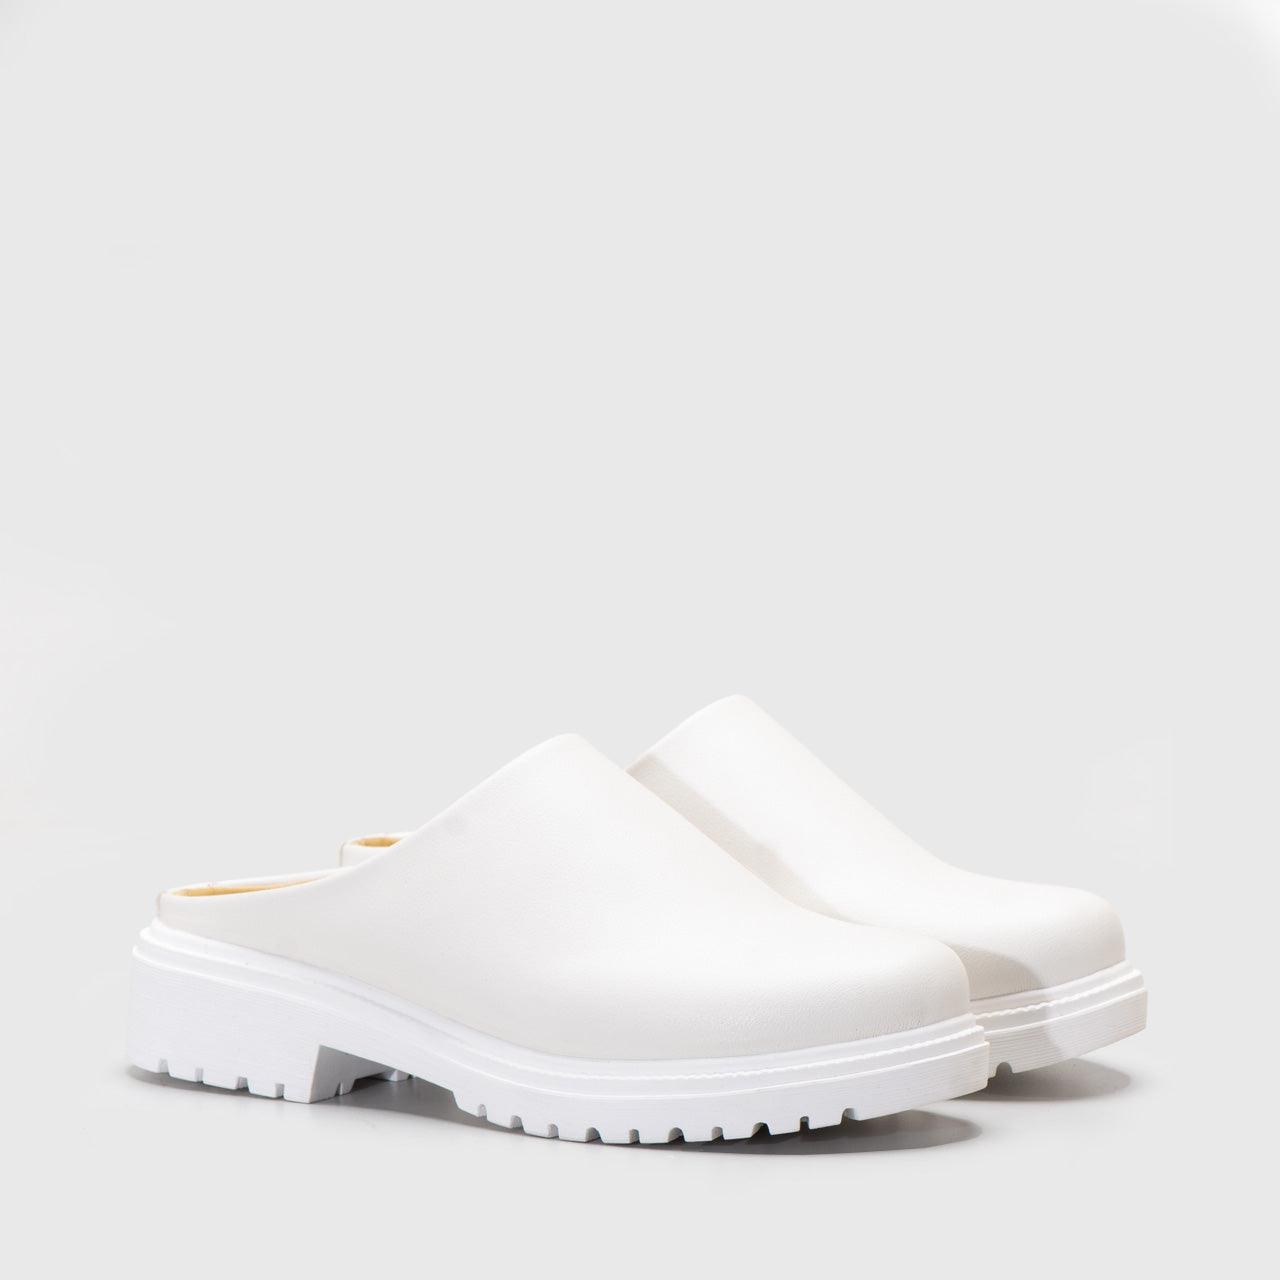 Adorable Projects Mules 35 / White Emery Mules White